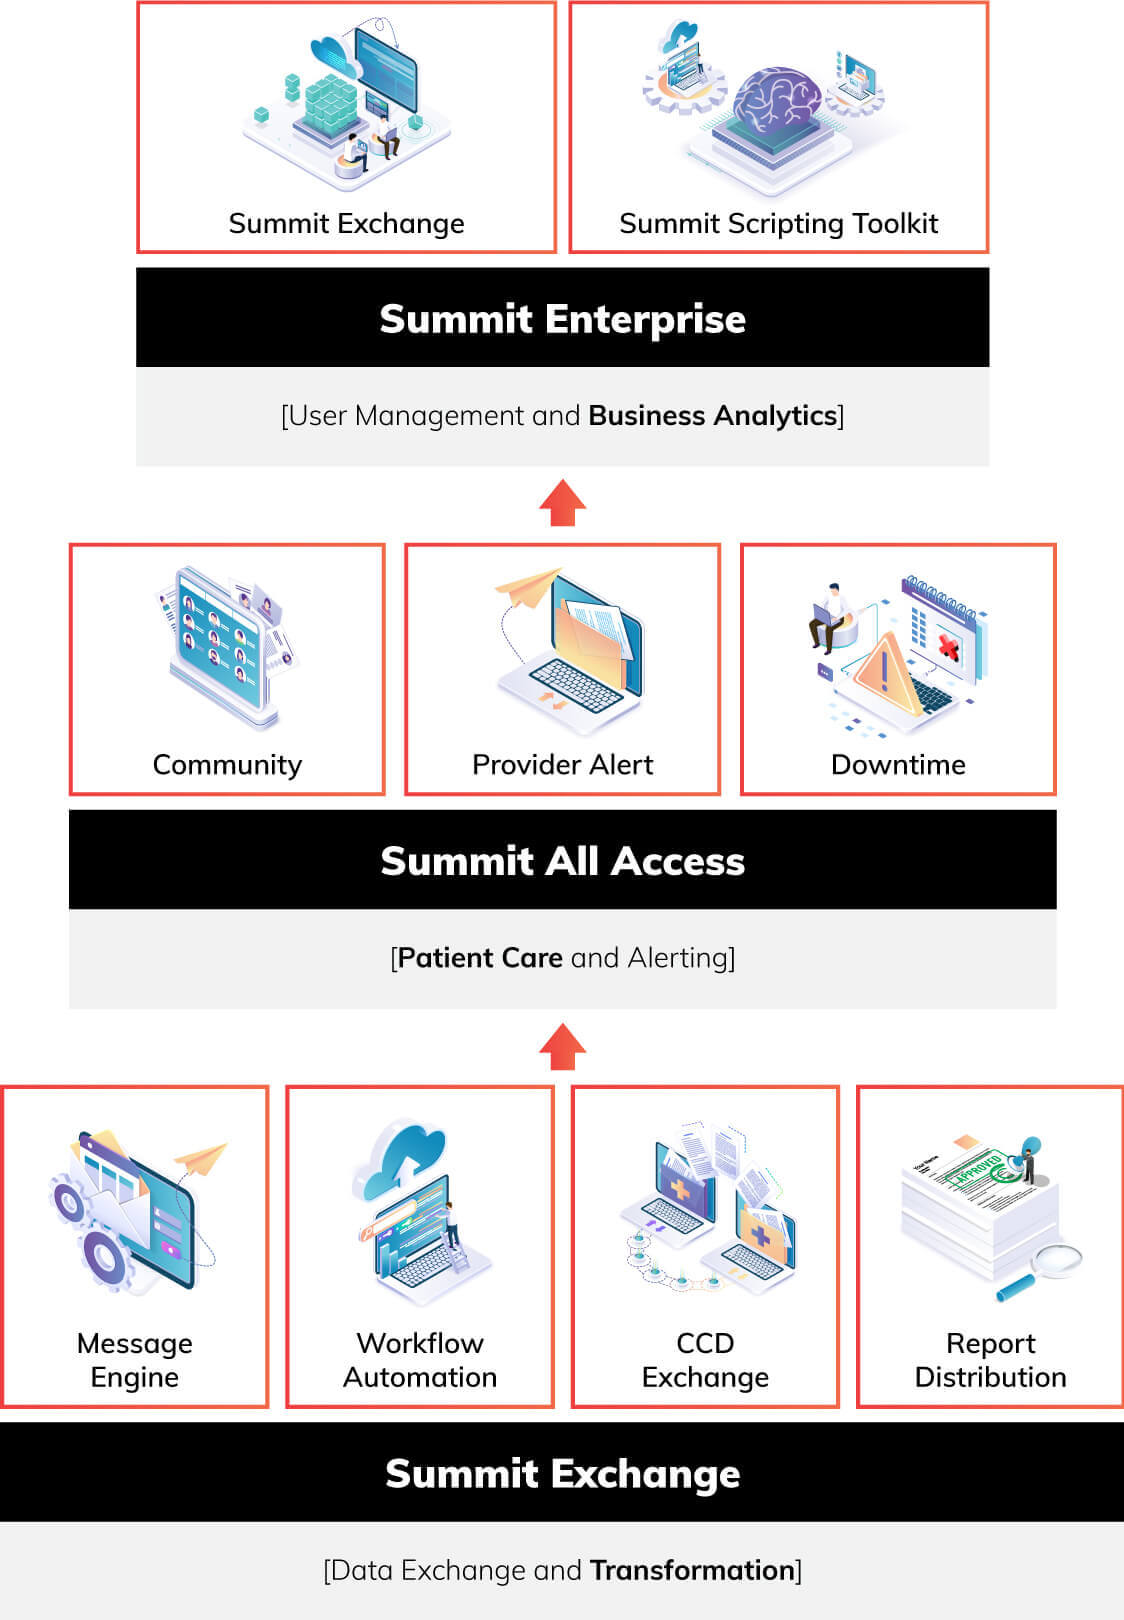 https://www.consensus.com/wp-content/uploads/2022/03/depiction-of-the-Summit-Healthcare-product-mobile.jpg